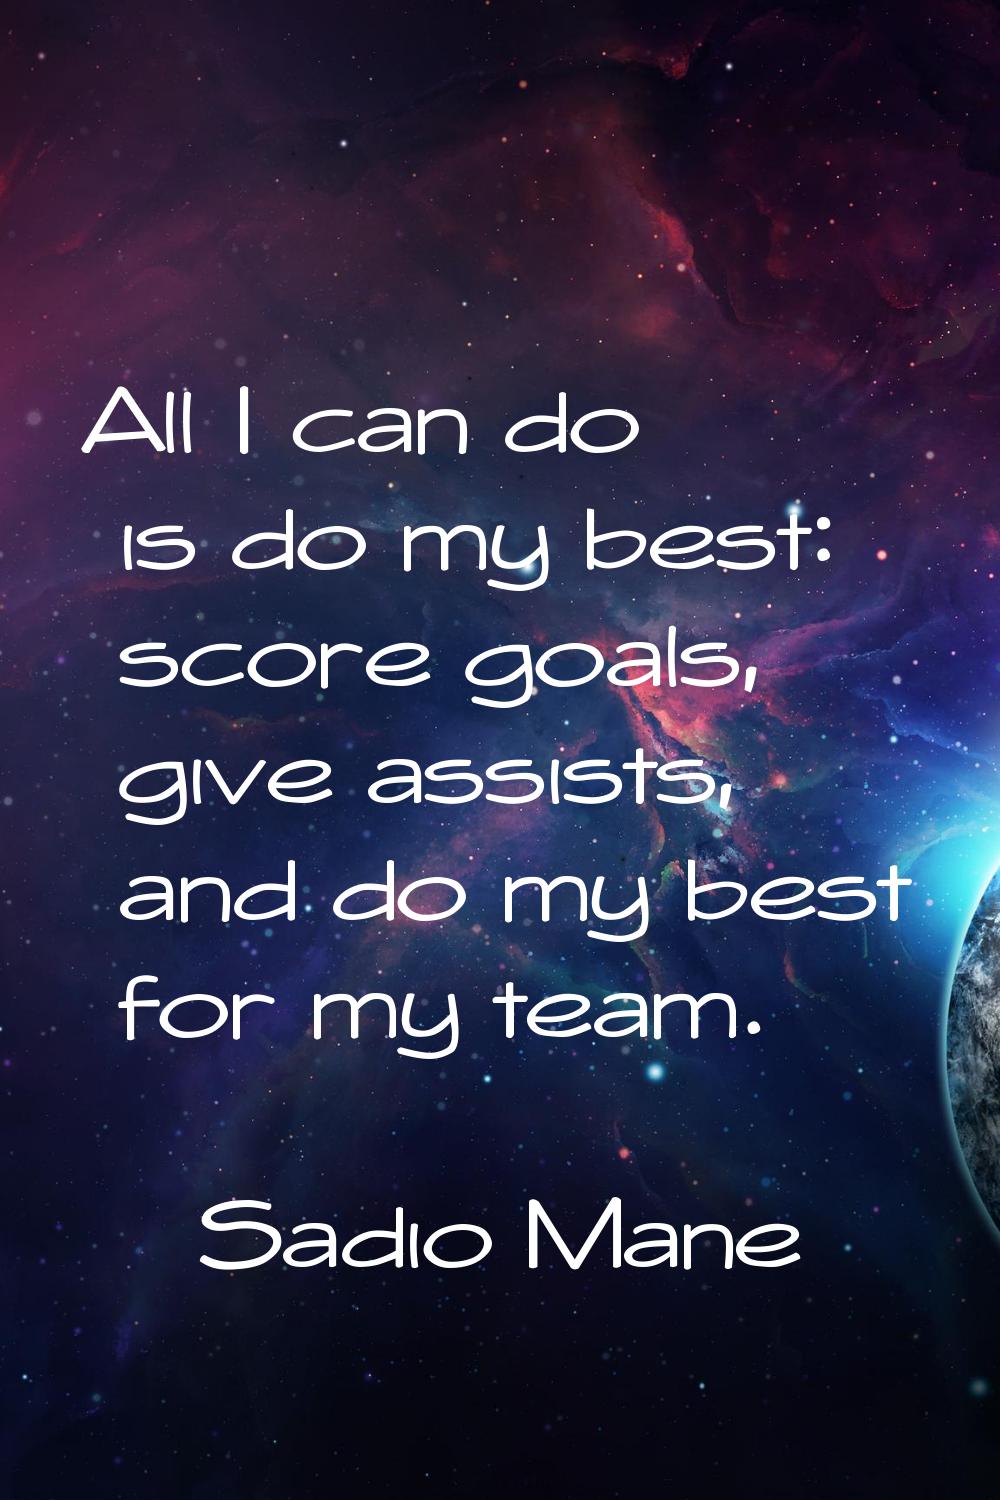 All I can do is do my best: score goals, give assists, and do my best for my team.